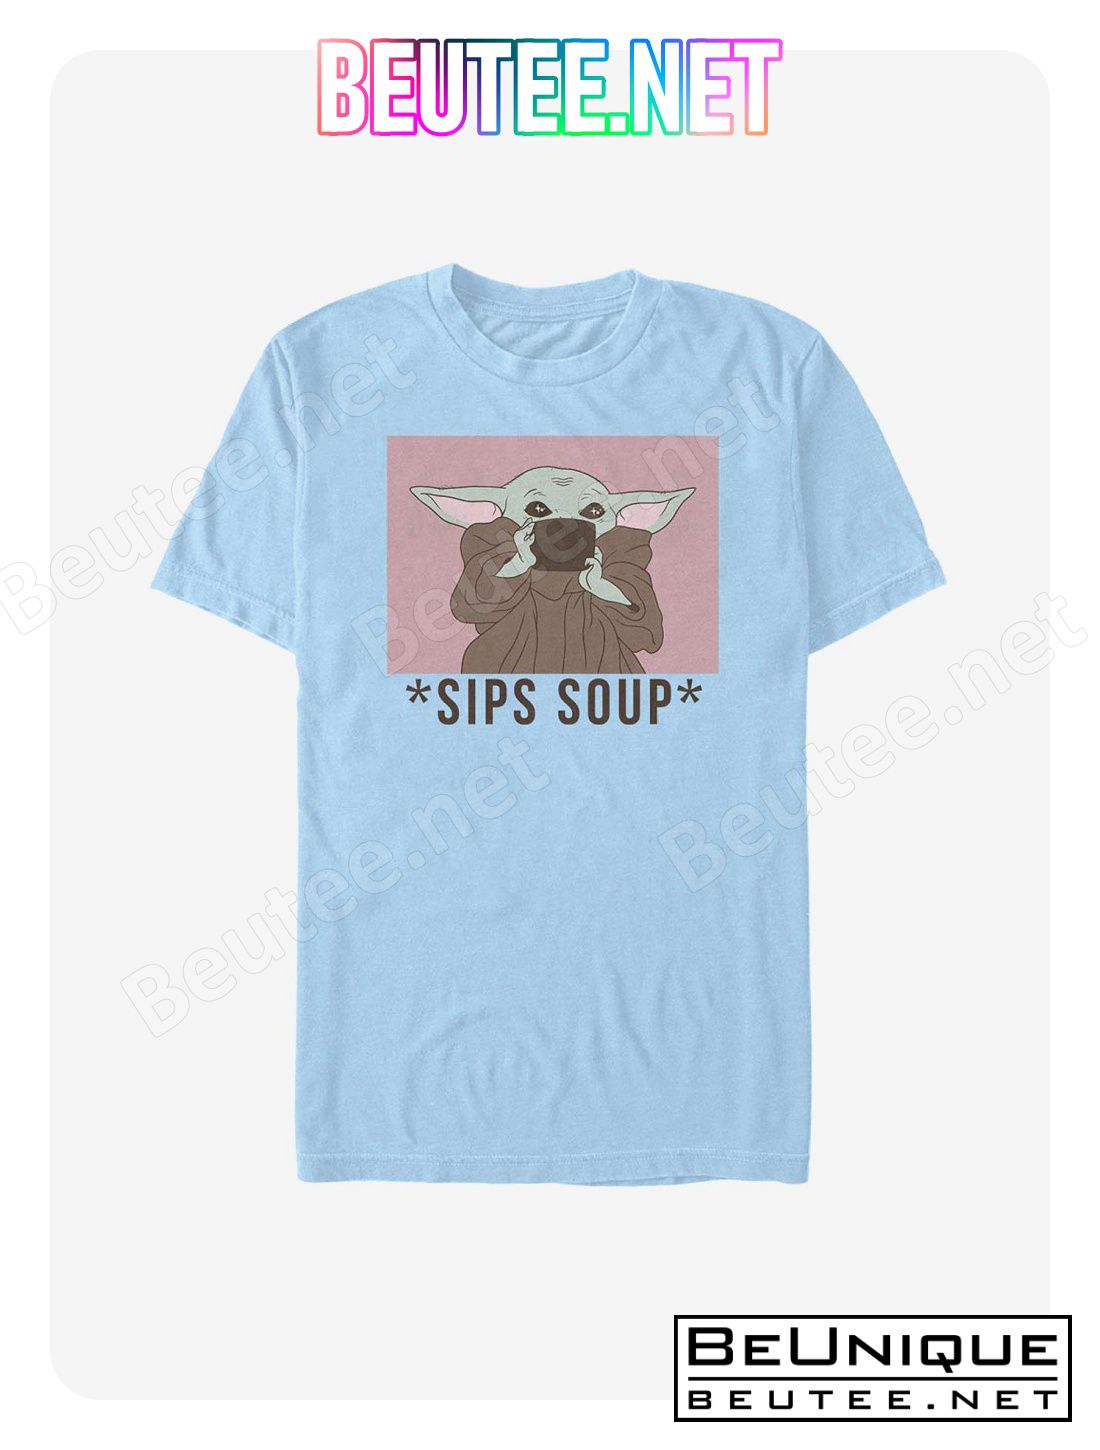 Star Wars The Mandalorian The Child Sips Soup T-Shirt